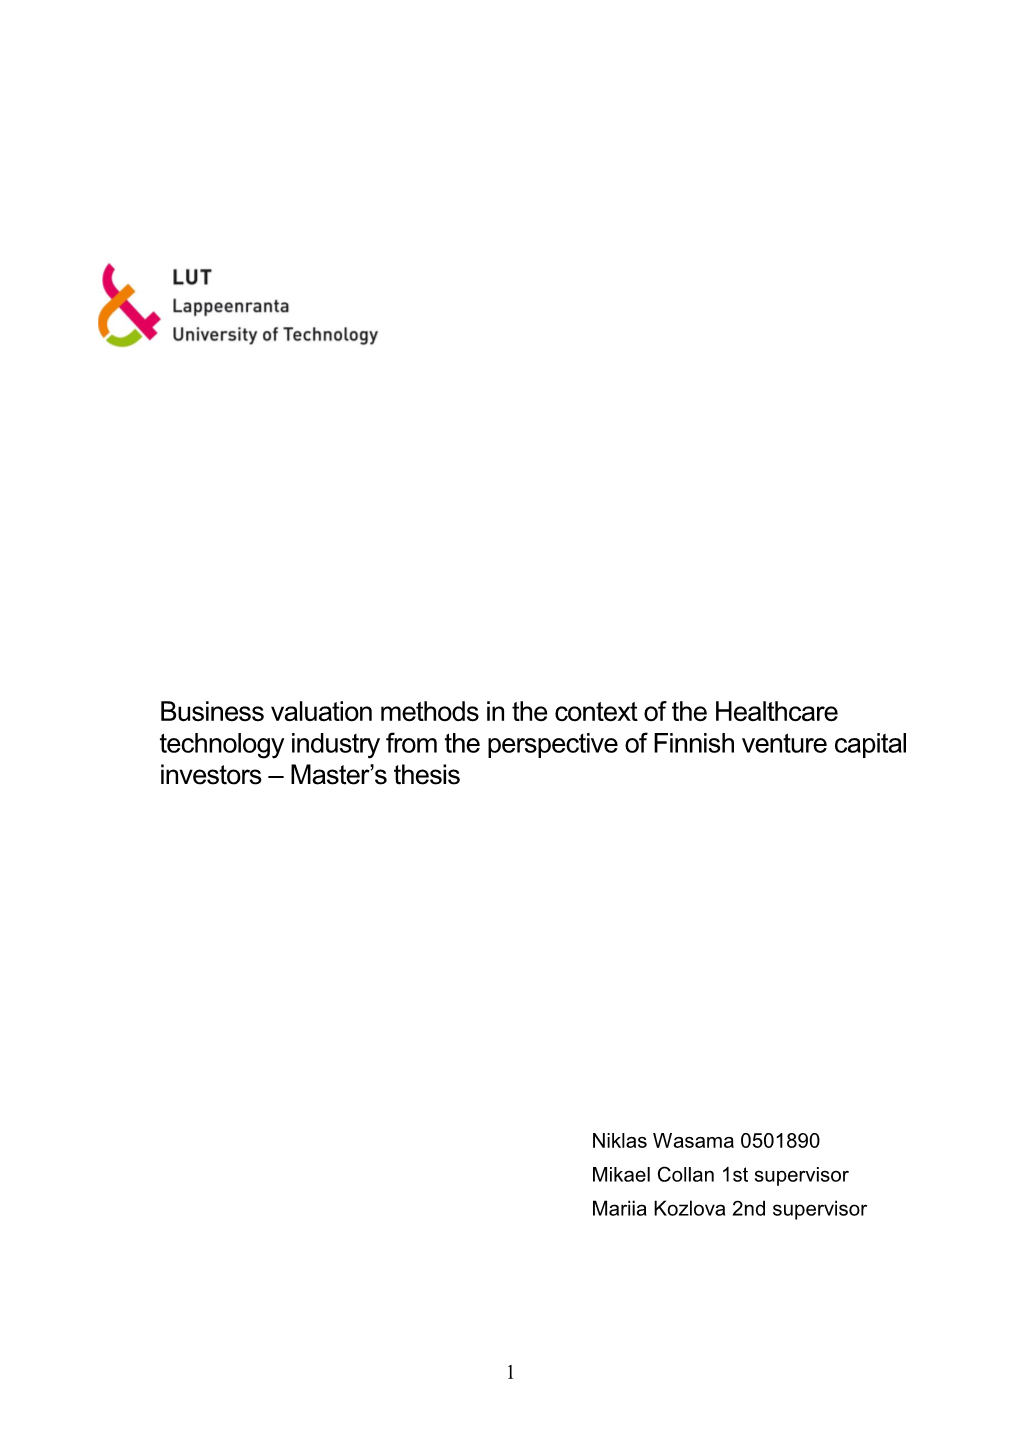 Business Valuation Methods in the Context of the Healthcare Technology Industry from the Perspective of Finnish Venture Capital Investors – Master’S Thesis